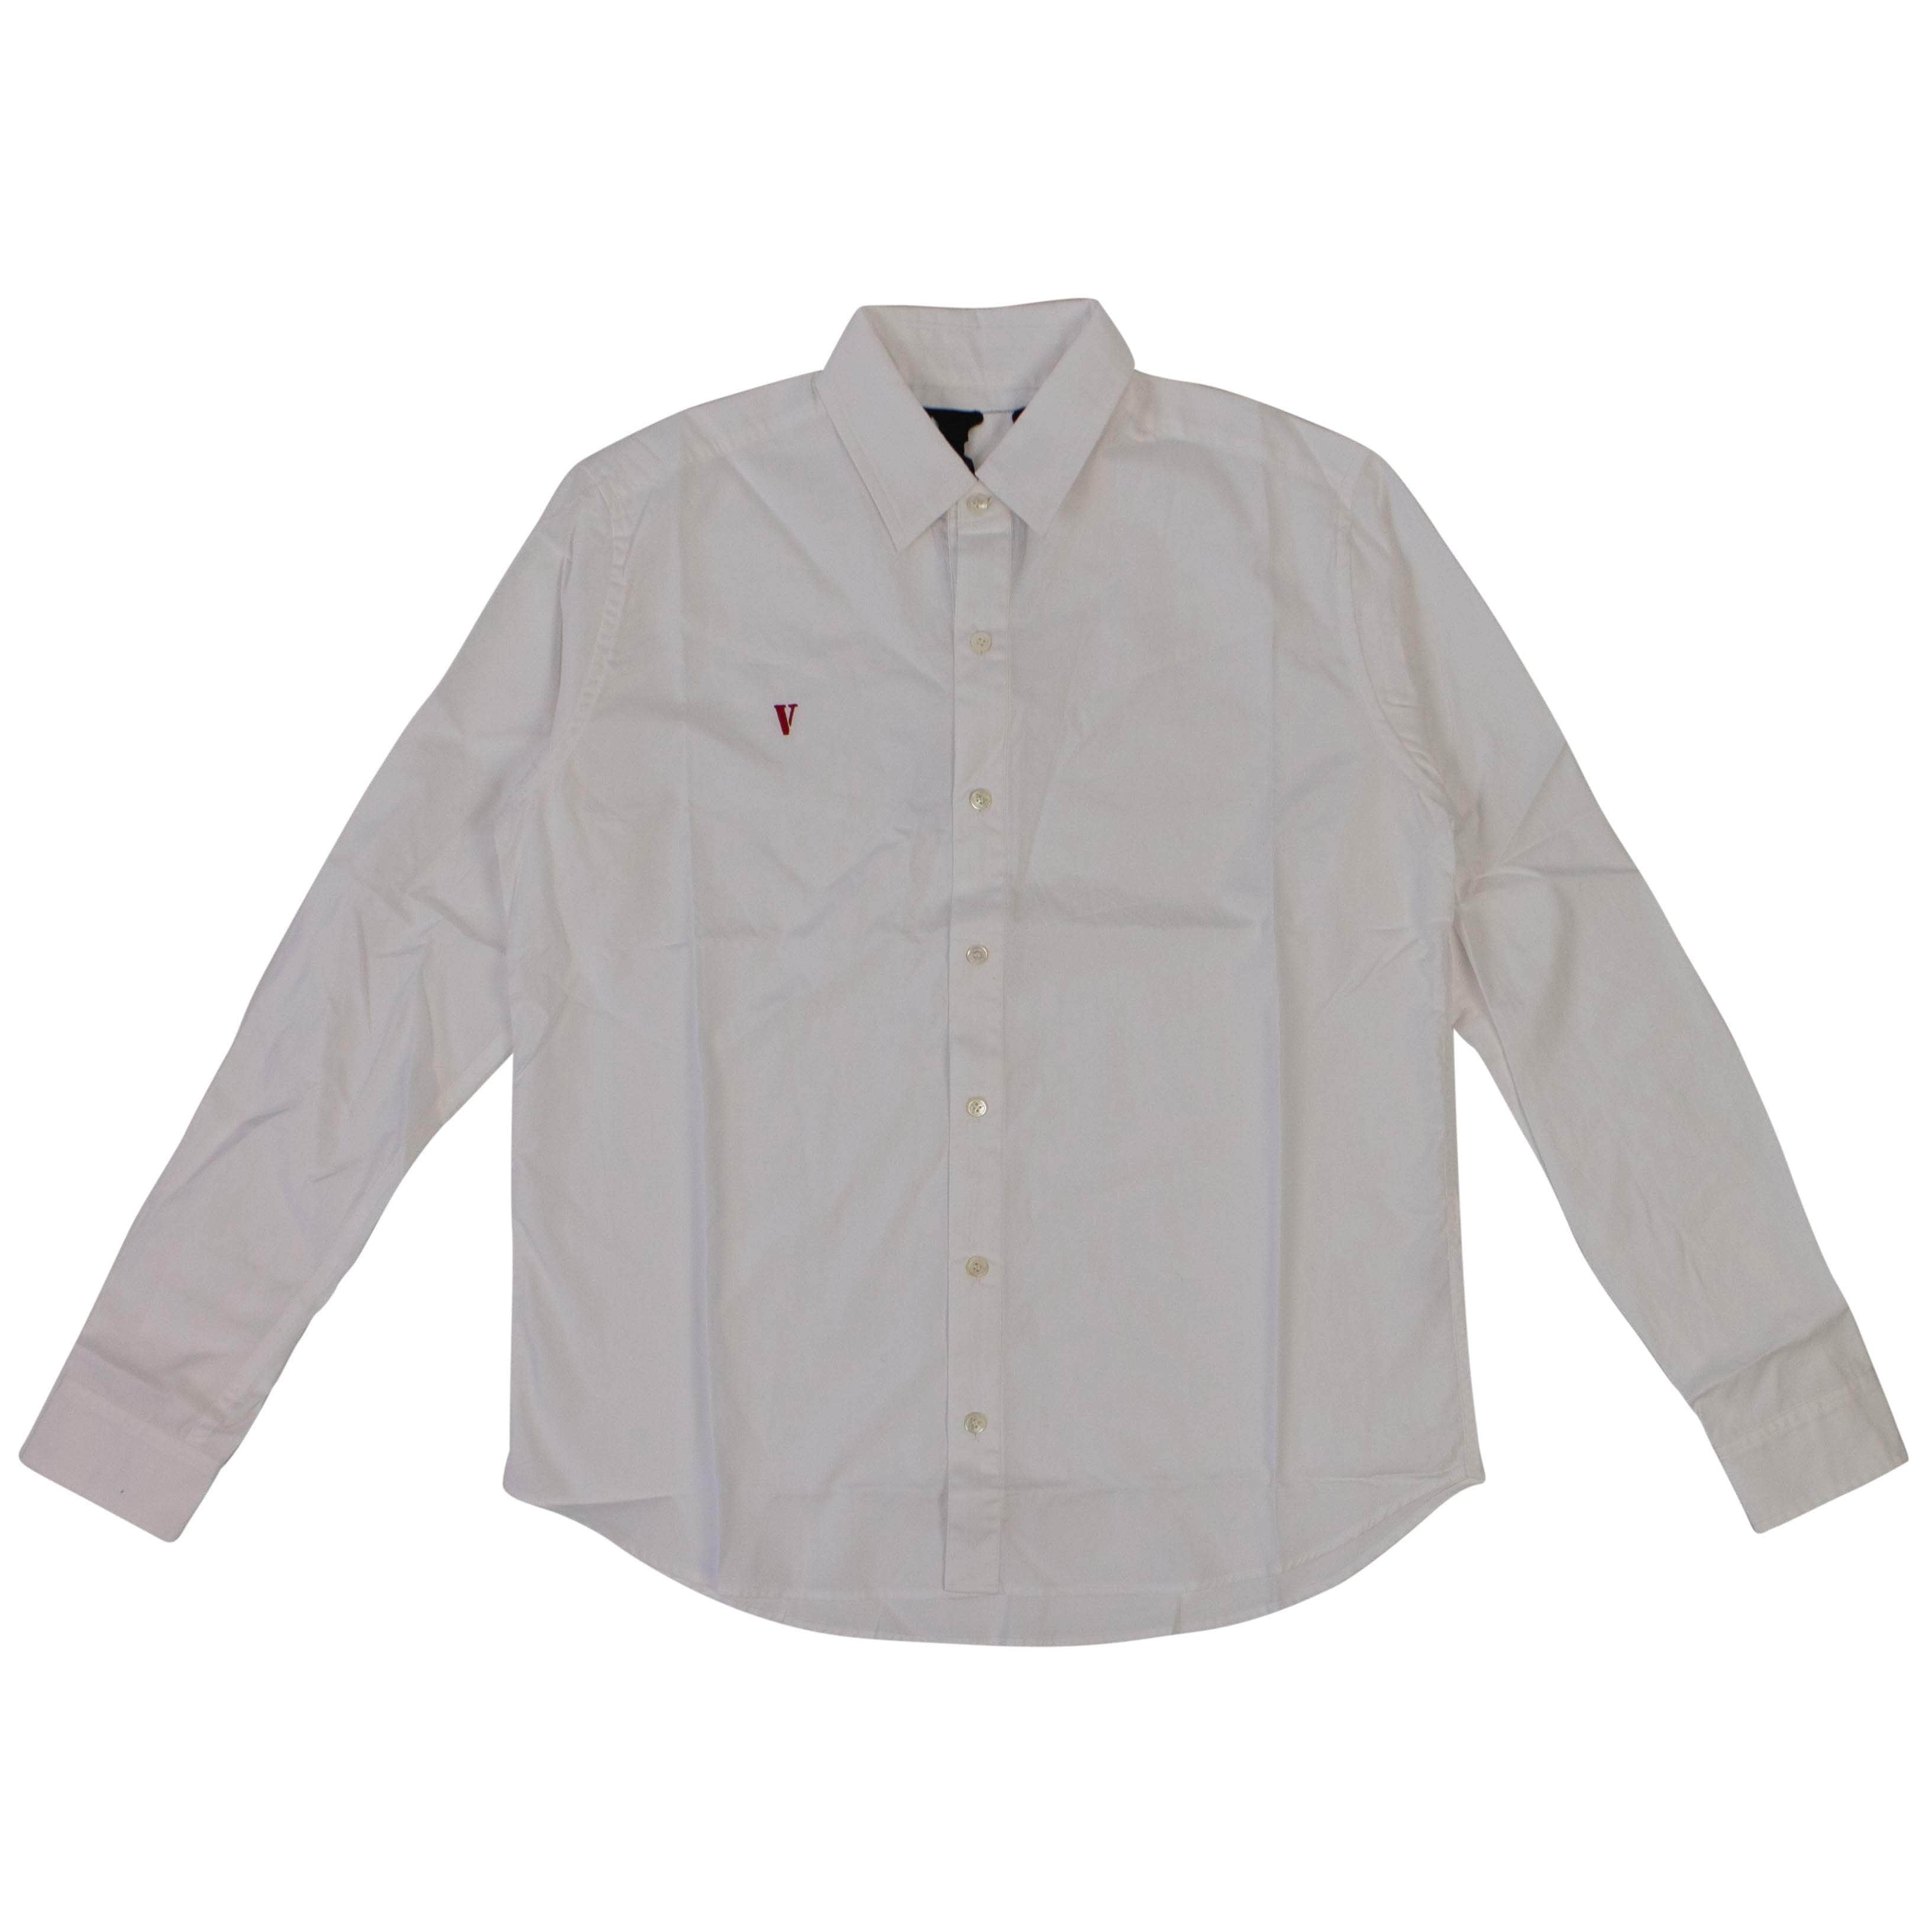 Vlone channelenable-all, chicmi, couponcollection, gender-mens, main-clothing, mens-shoes, shop375, under-250, vlone 2XL White & Red V Long Sleeve Button Down Shirt 72V-32/2XL 72V-32/2XL